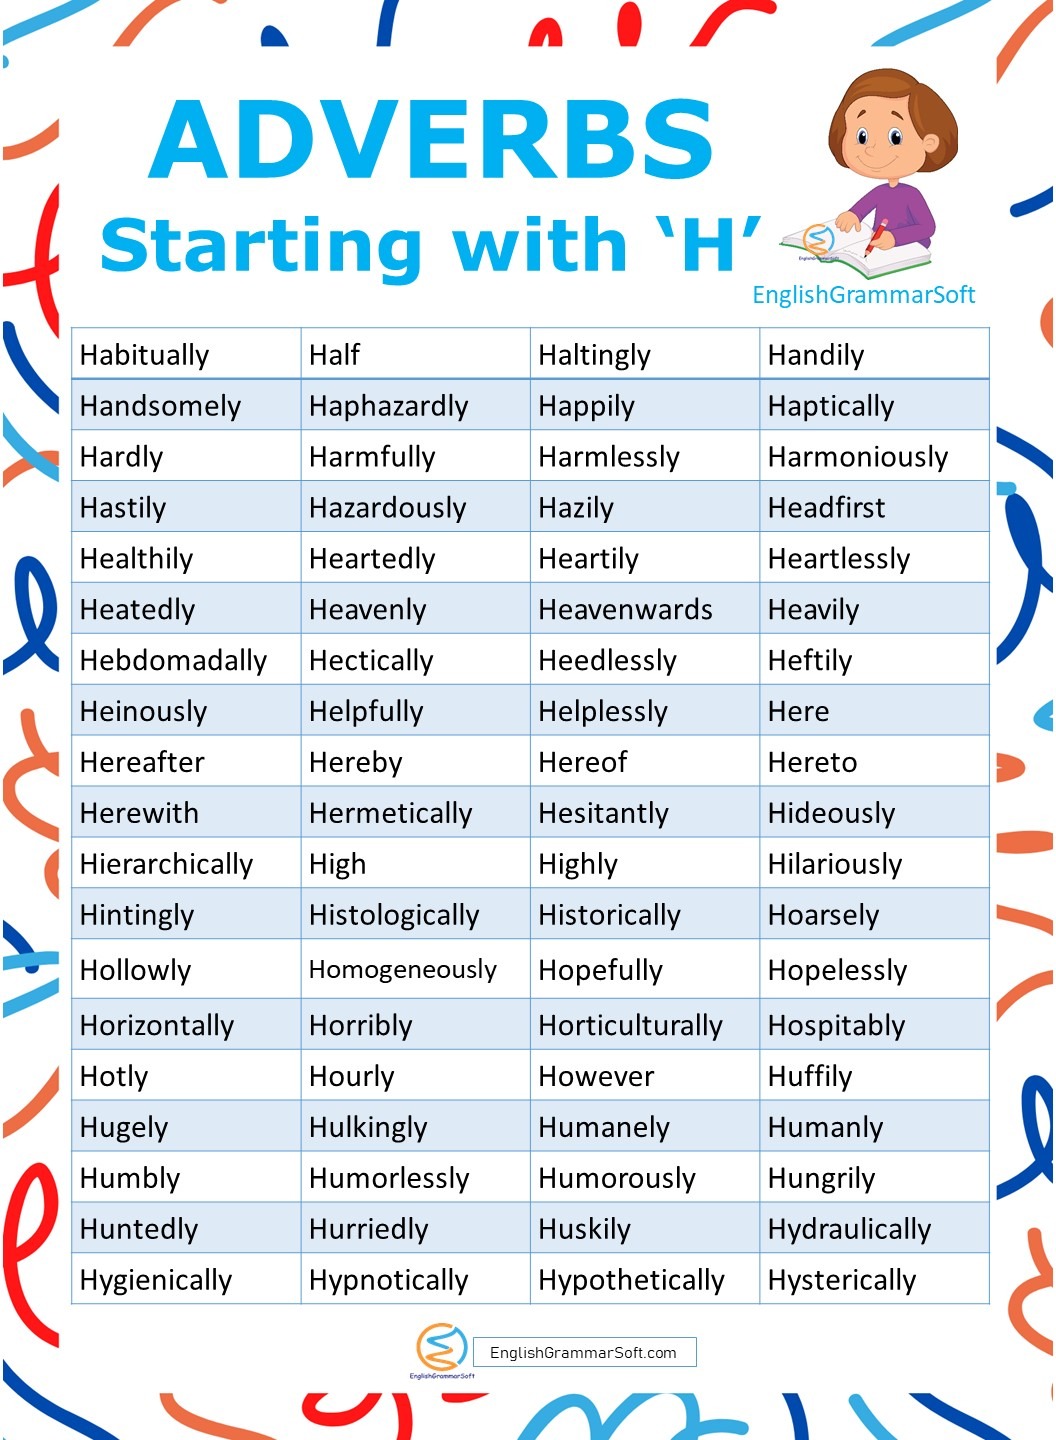 adverbs starting with H